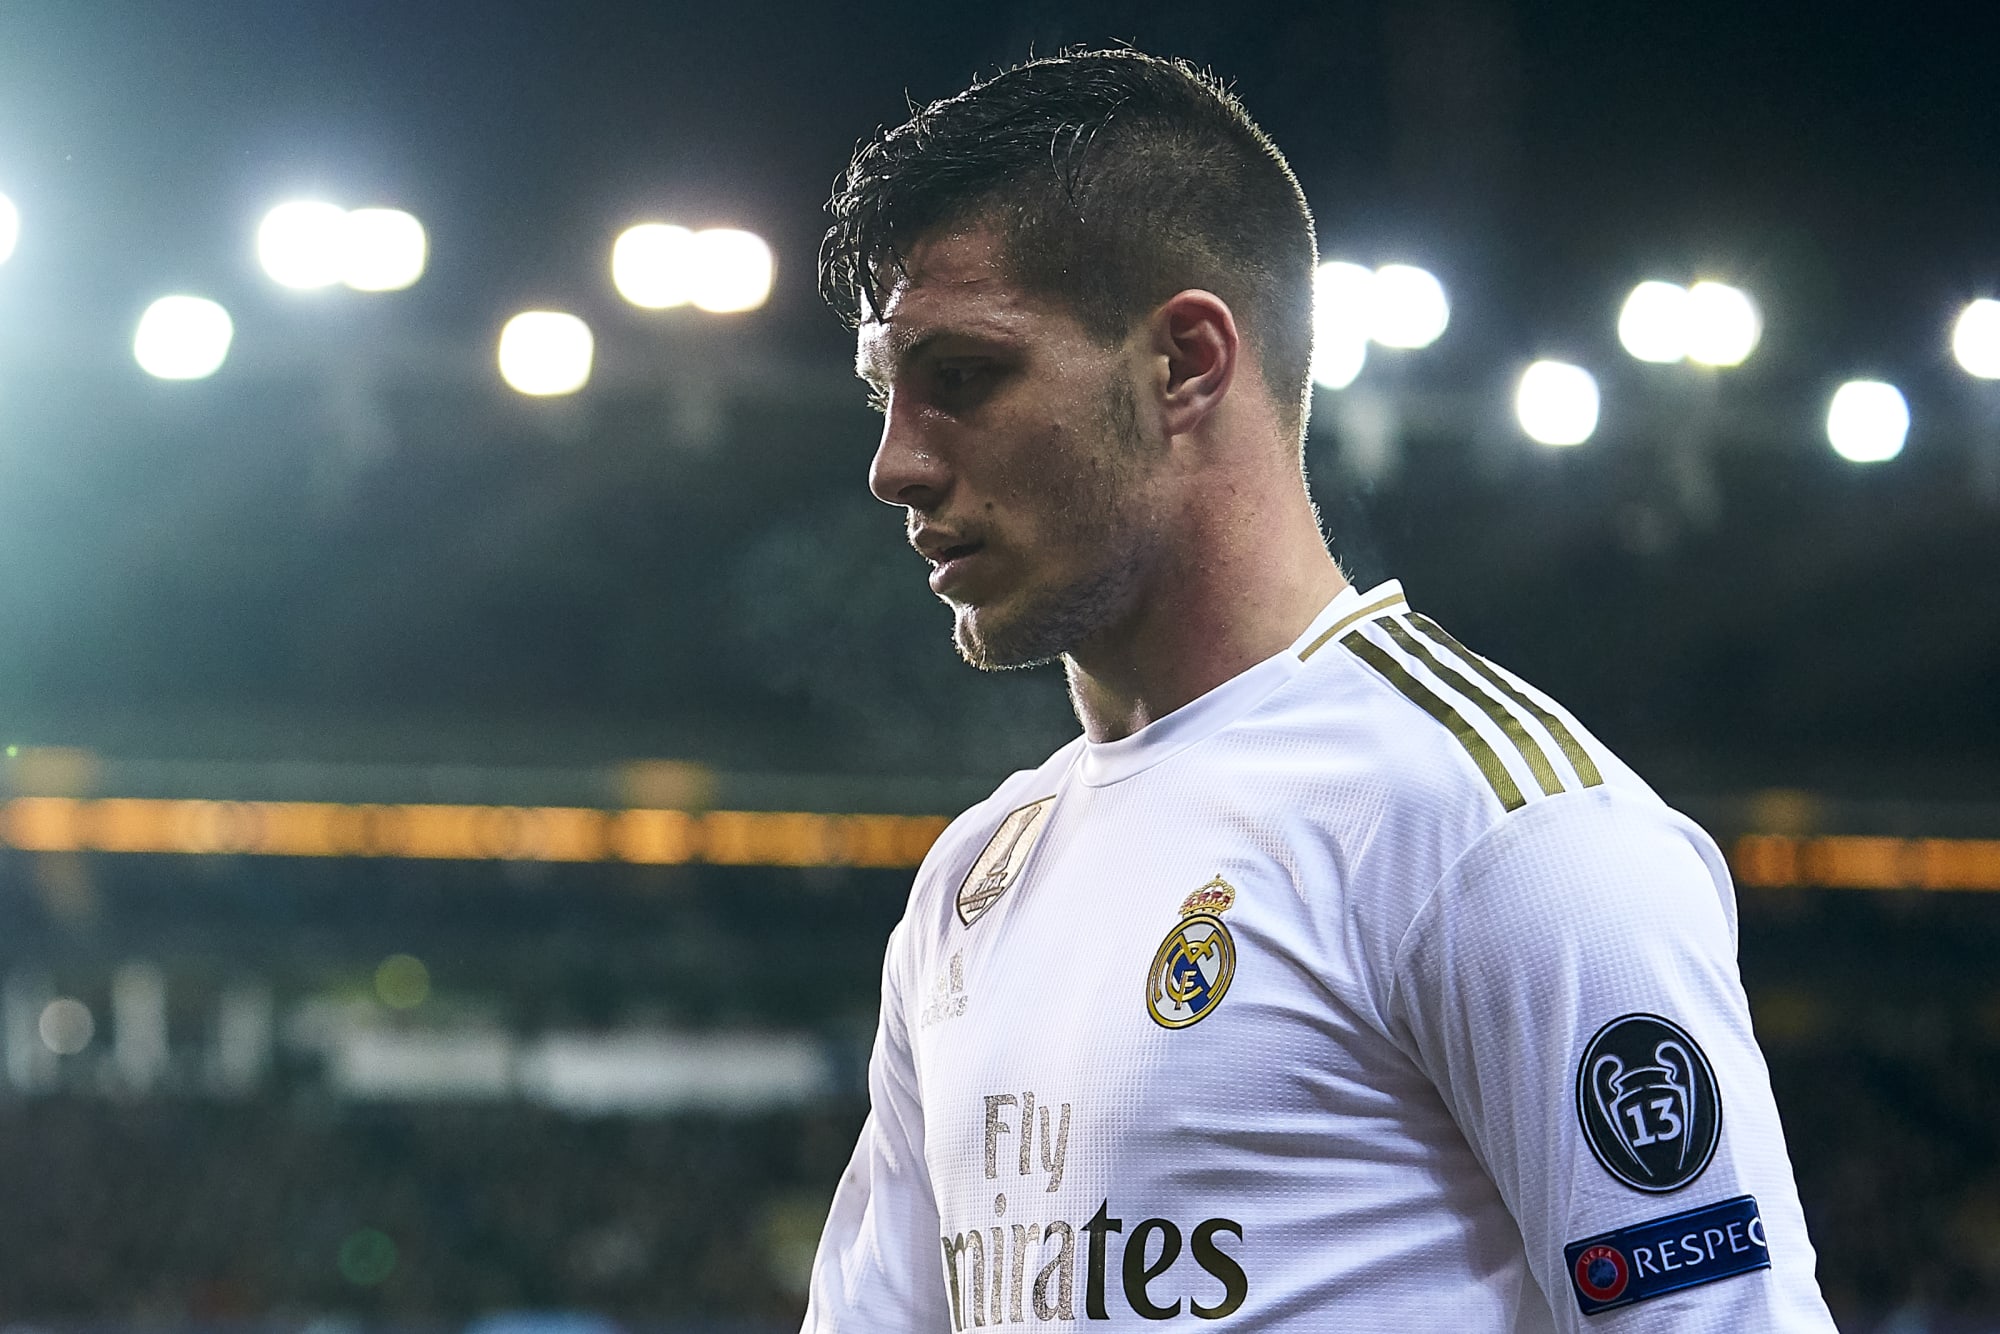 What are your expectations for Jovic's season